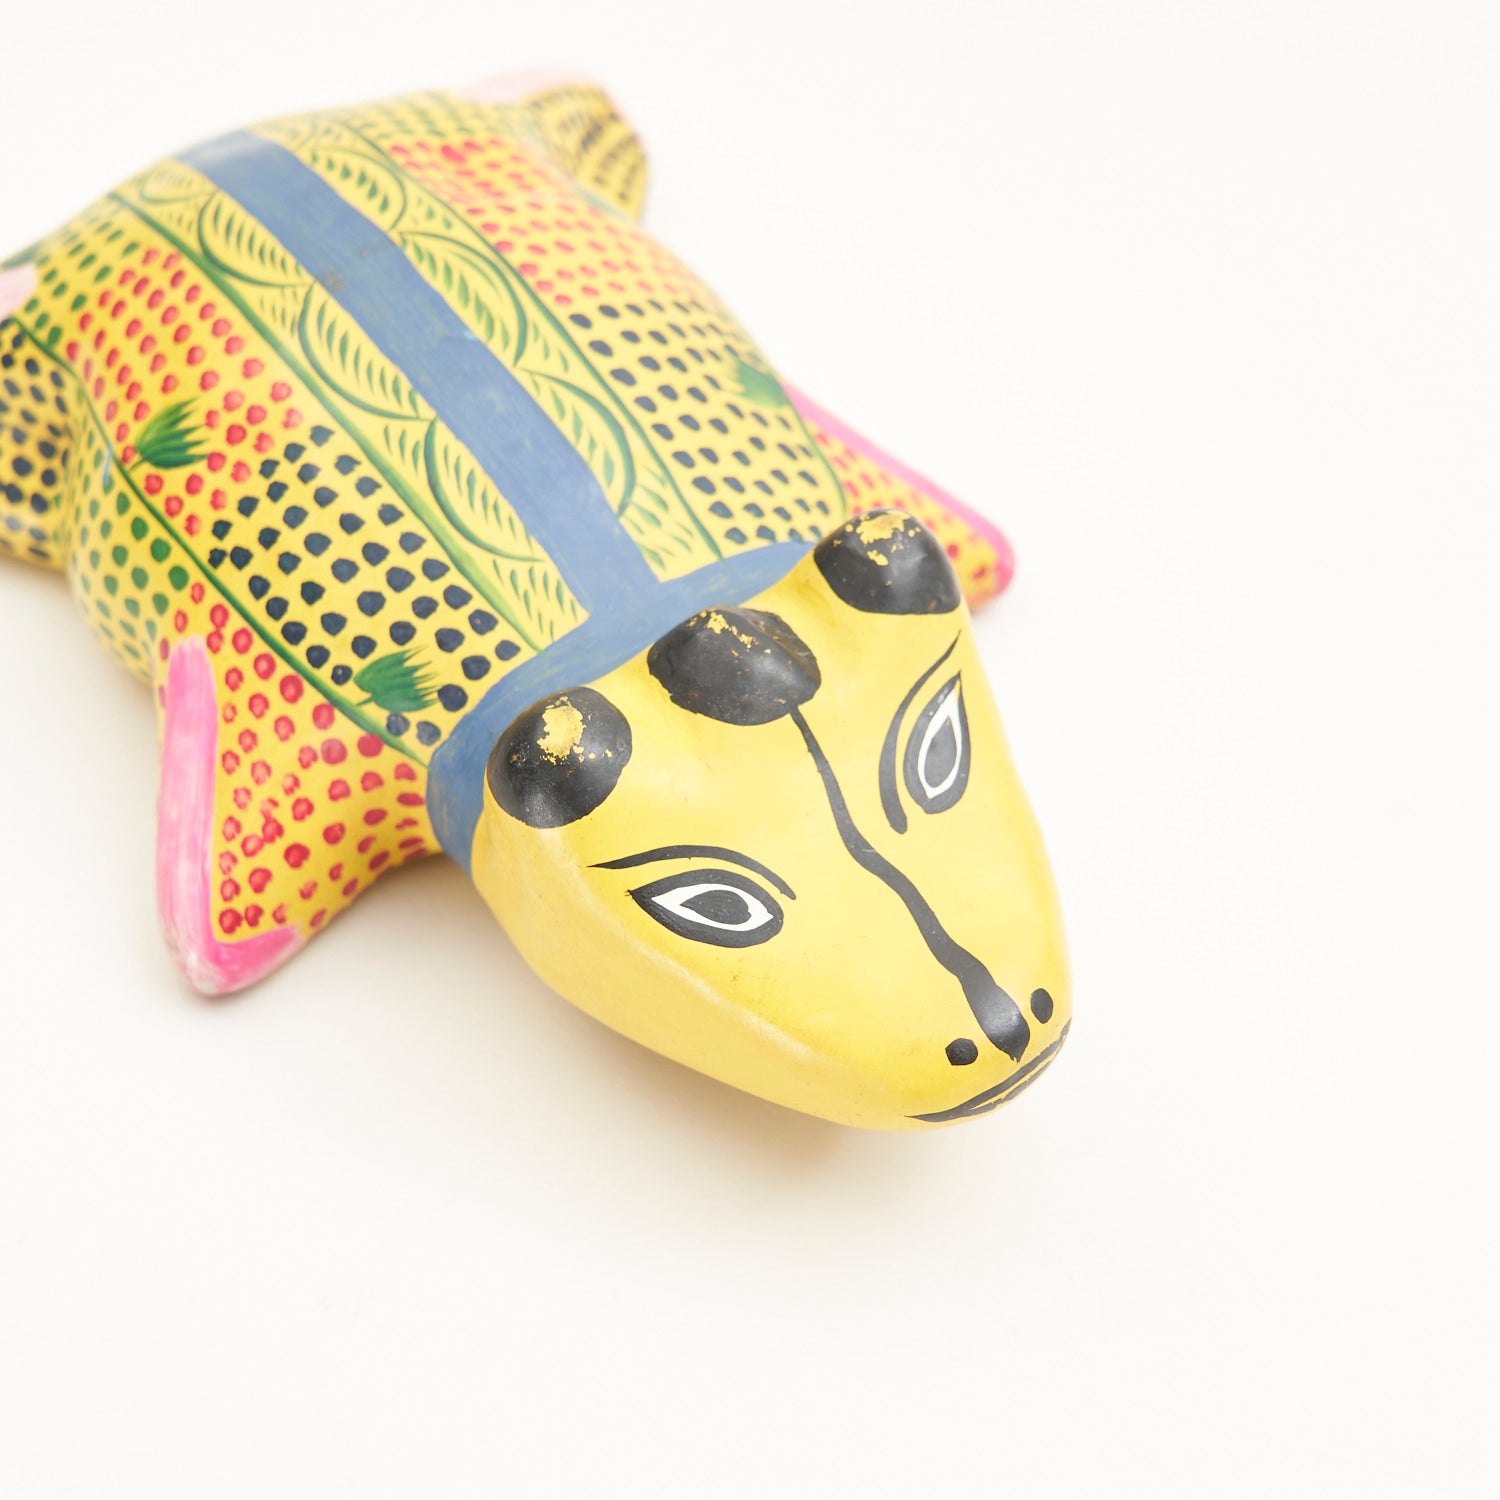 Mexican Hand Painted Wooden Animal